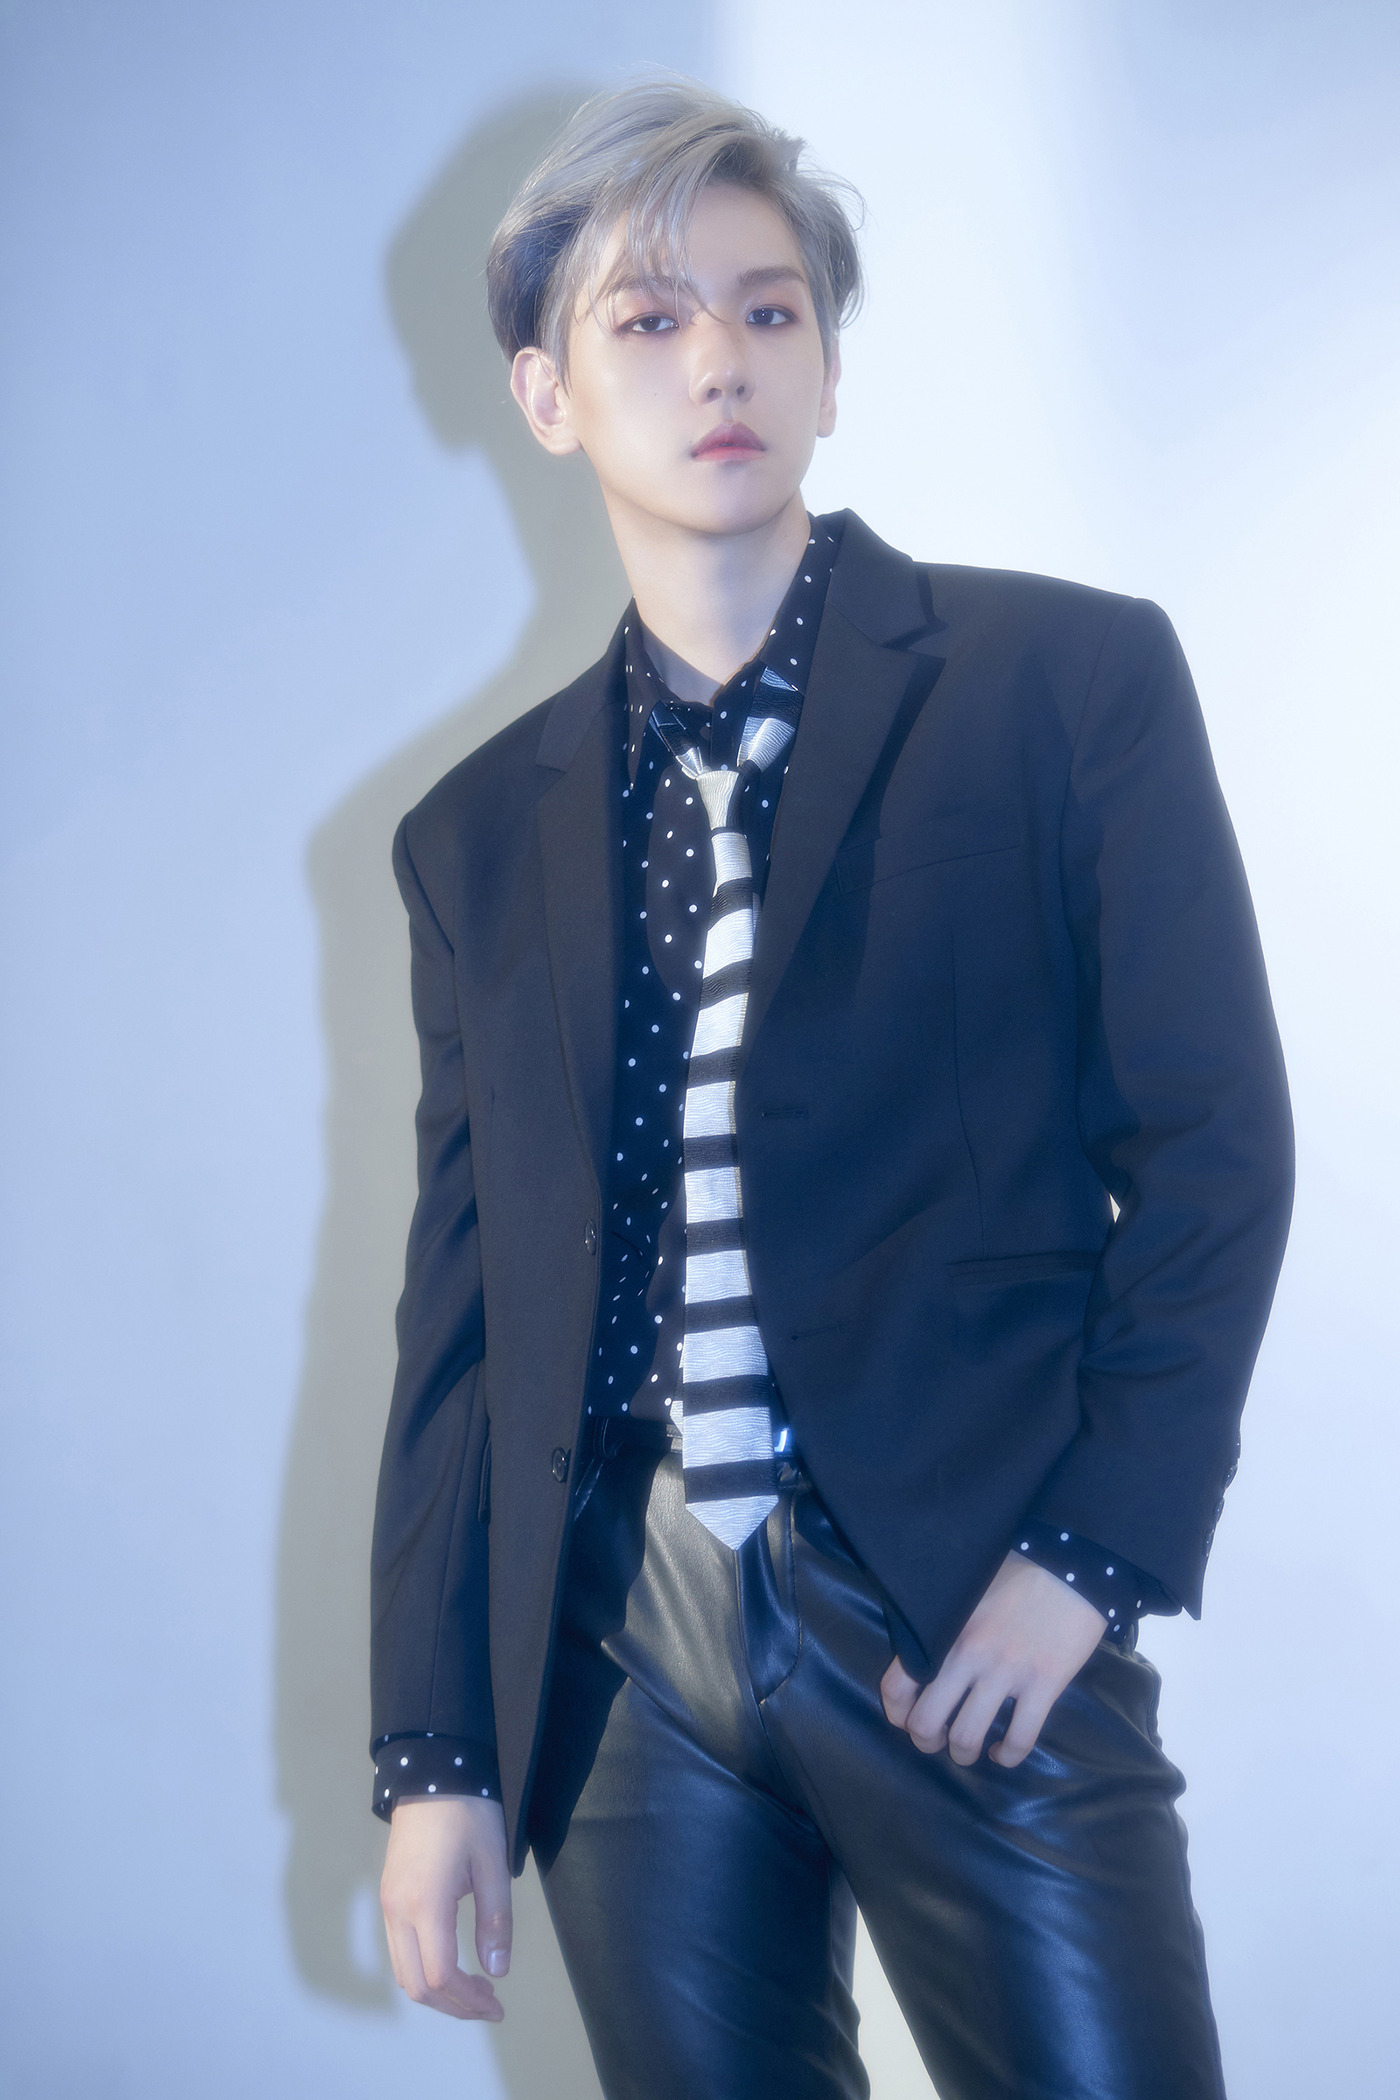 Baekhyun was the first solo album released on the 10th, City Lights (City Lights), and topped the Gaon Weekly Album Comprehensive Chart (July 7-13) released on the 18th.This album has proved to be hotly popular since it exceeded 400,000 pre-orders before its release, and has gained high interest by ranking first in various domestic chart charts such as Hanter chart and HotTrax, first in 66 regions around the world on iTunes top album chart, and first in Chinas largest music site QQ music and cougu music album sales chart.The album includes a total of six songs in trendy moods, including the title song UN Village (Stay Up), Betcha (Betcha), Ice Queen, Diamond (Diamond), and Psycho).Meanwhile, Baekhyun will hold the EXO fifth solo concert Exo Planet #5 - Exploration - (EXO PLANET #5 - EXpLOration -) at KSPO DOME in Seoul Olympic Park for a total of 6 days from 19th to 21st and 26th to 28th.